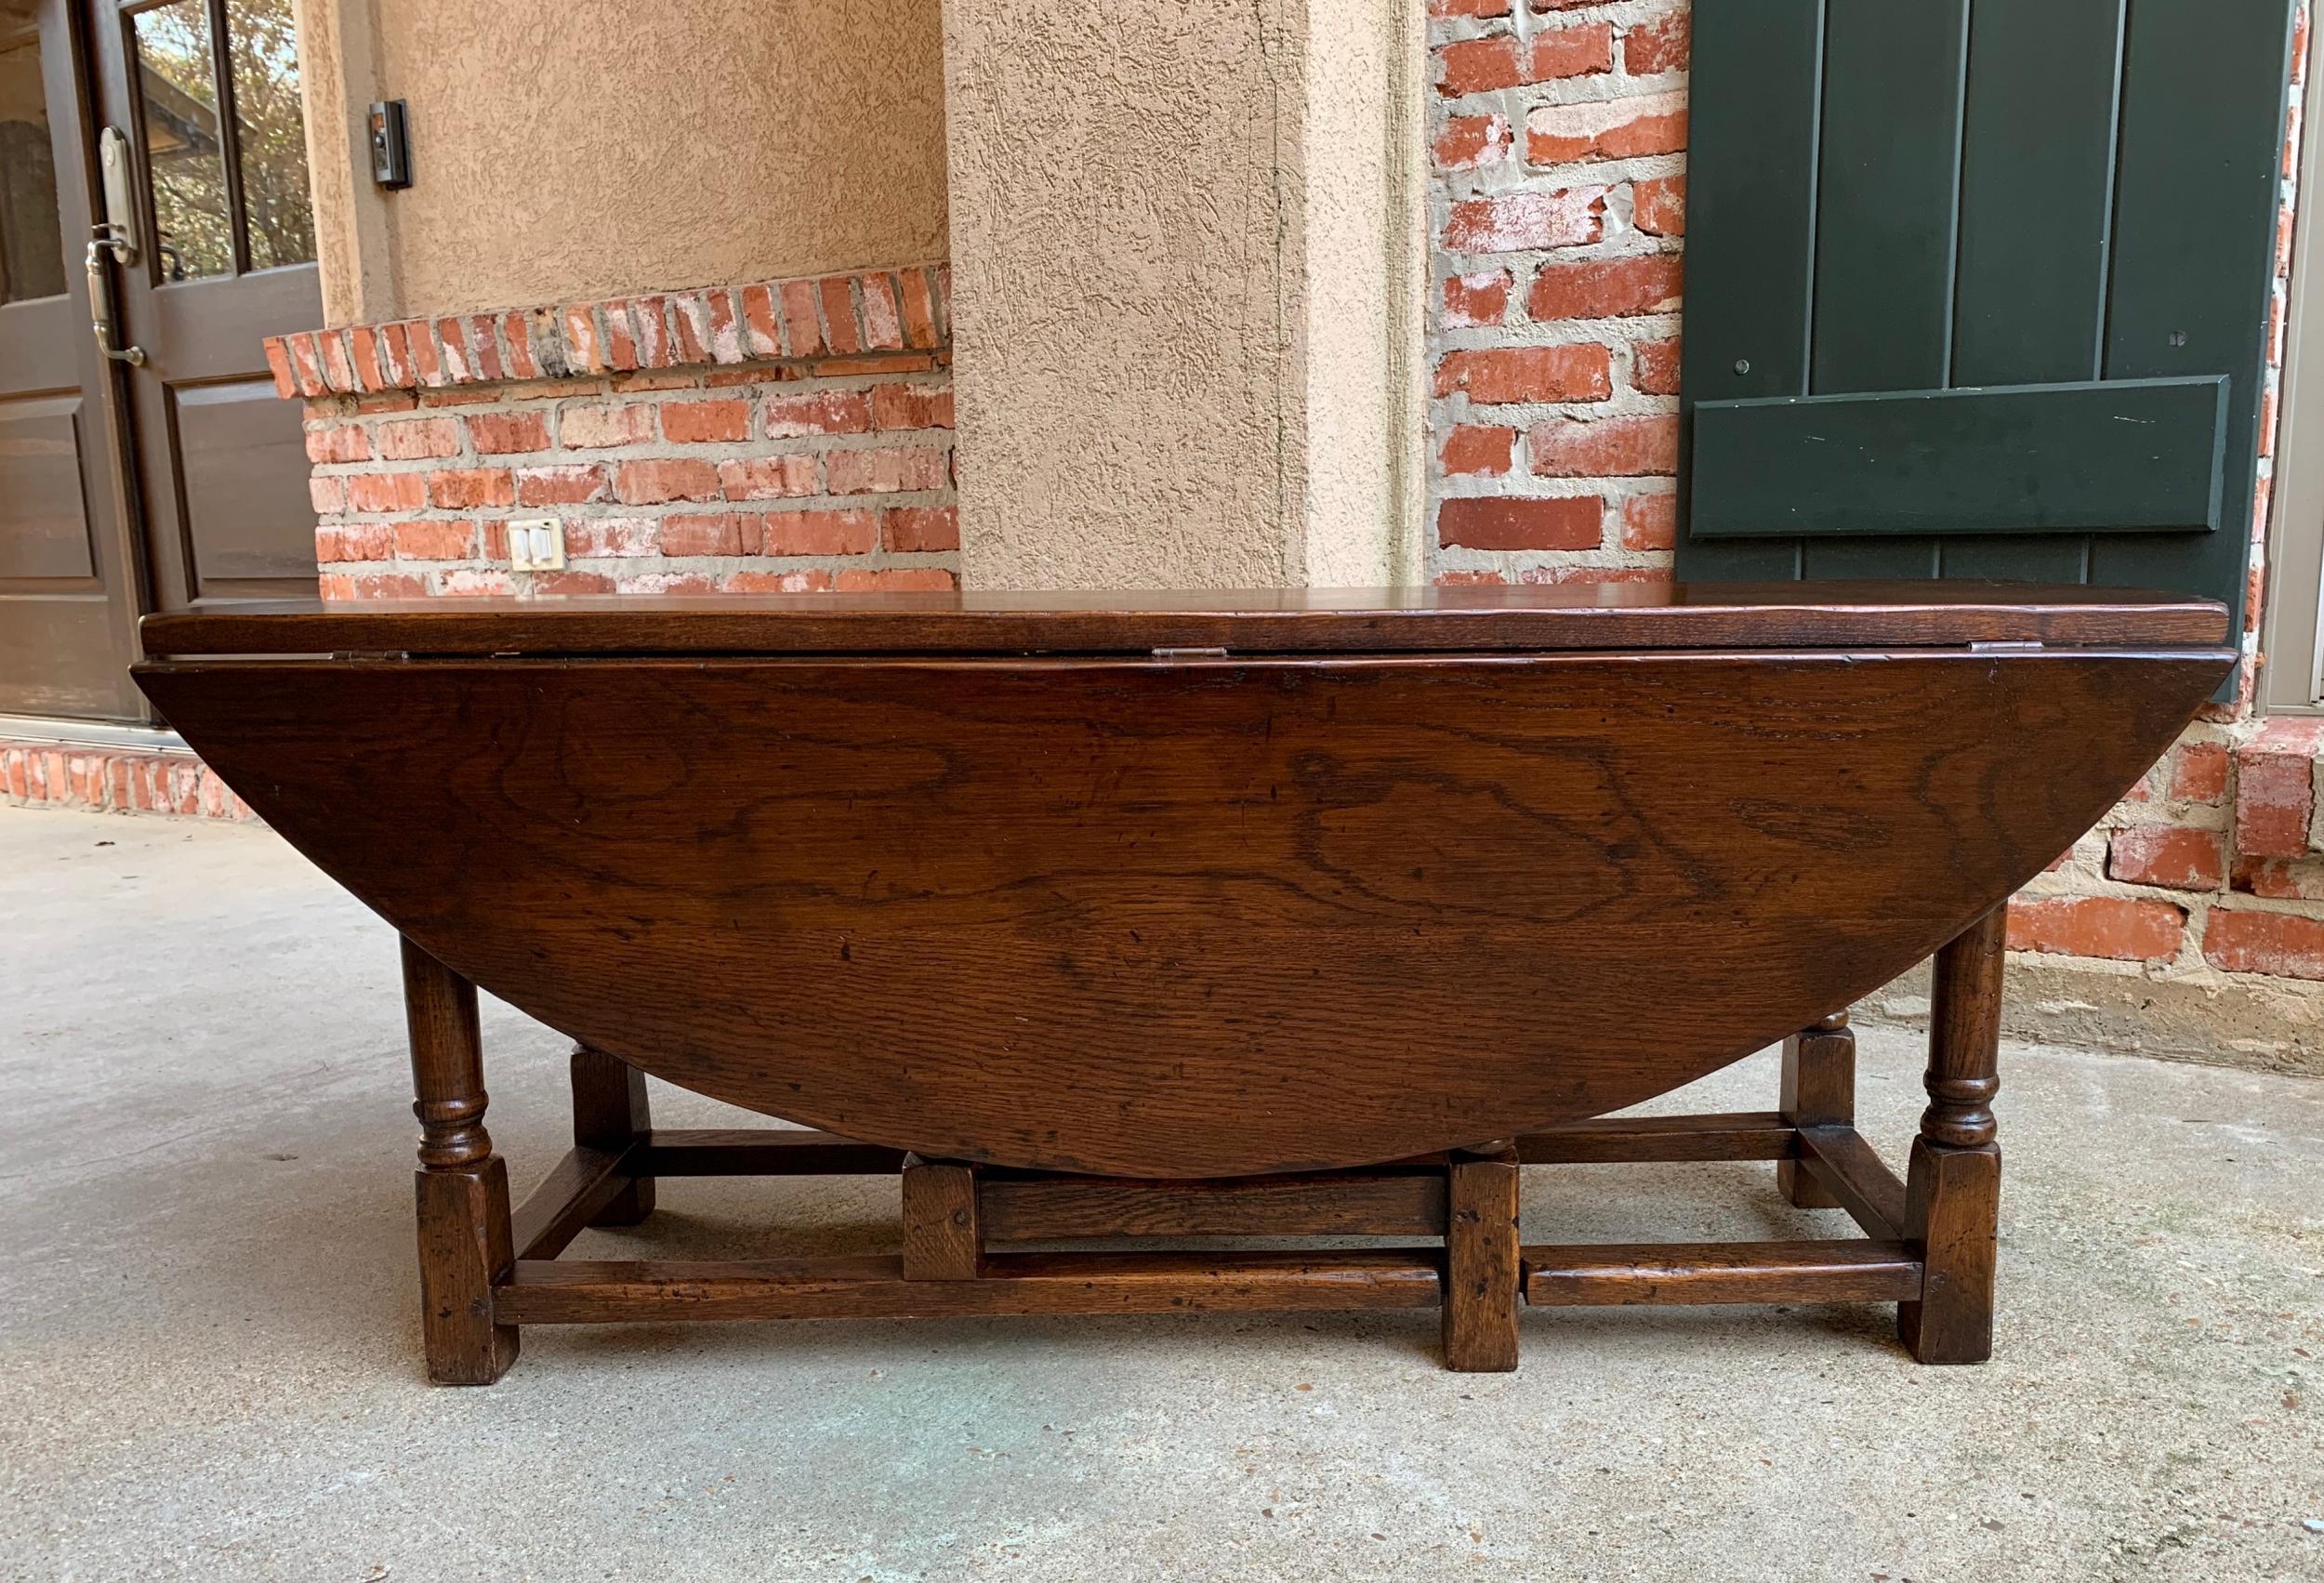 Vintage English coffee table drop leaf jacobean gate leg wake table design.

~Direct from England~
~Lovely silhouette on this vintage English coffee table~
~Long and slender, in a traditional “wake table” design, with two drop leaves that can